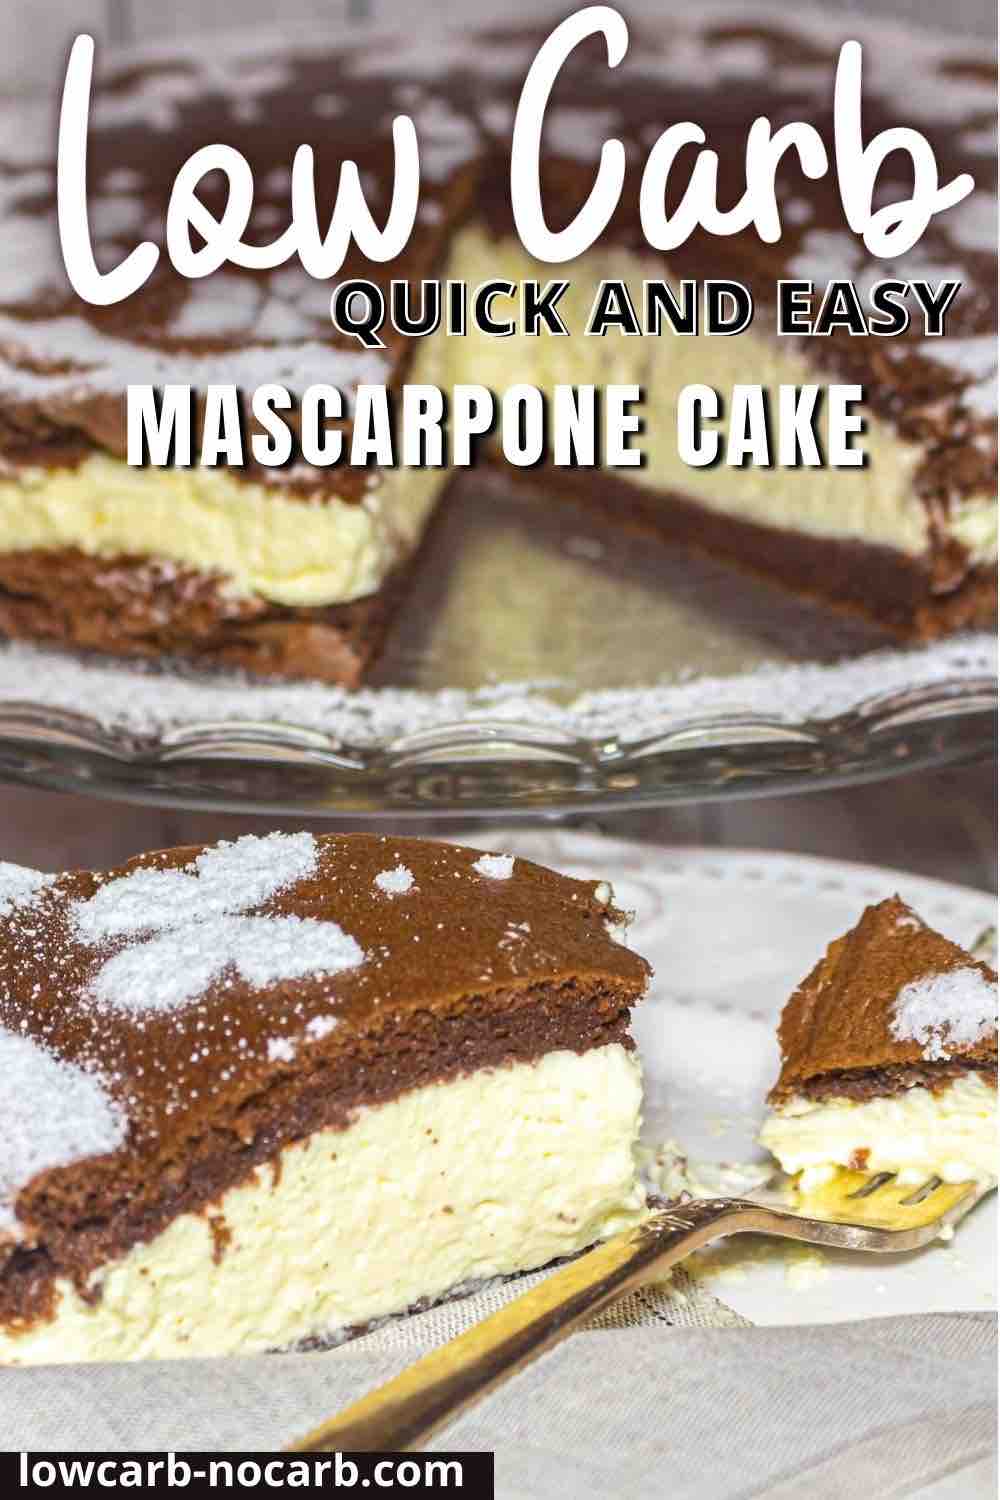 Low carb quick and easy mascarpone cake.